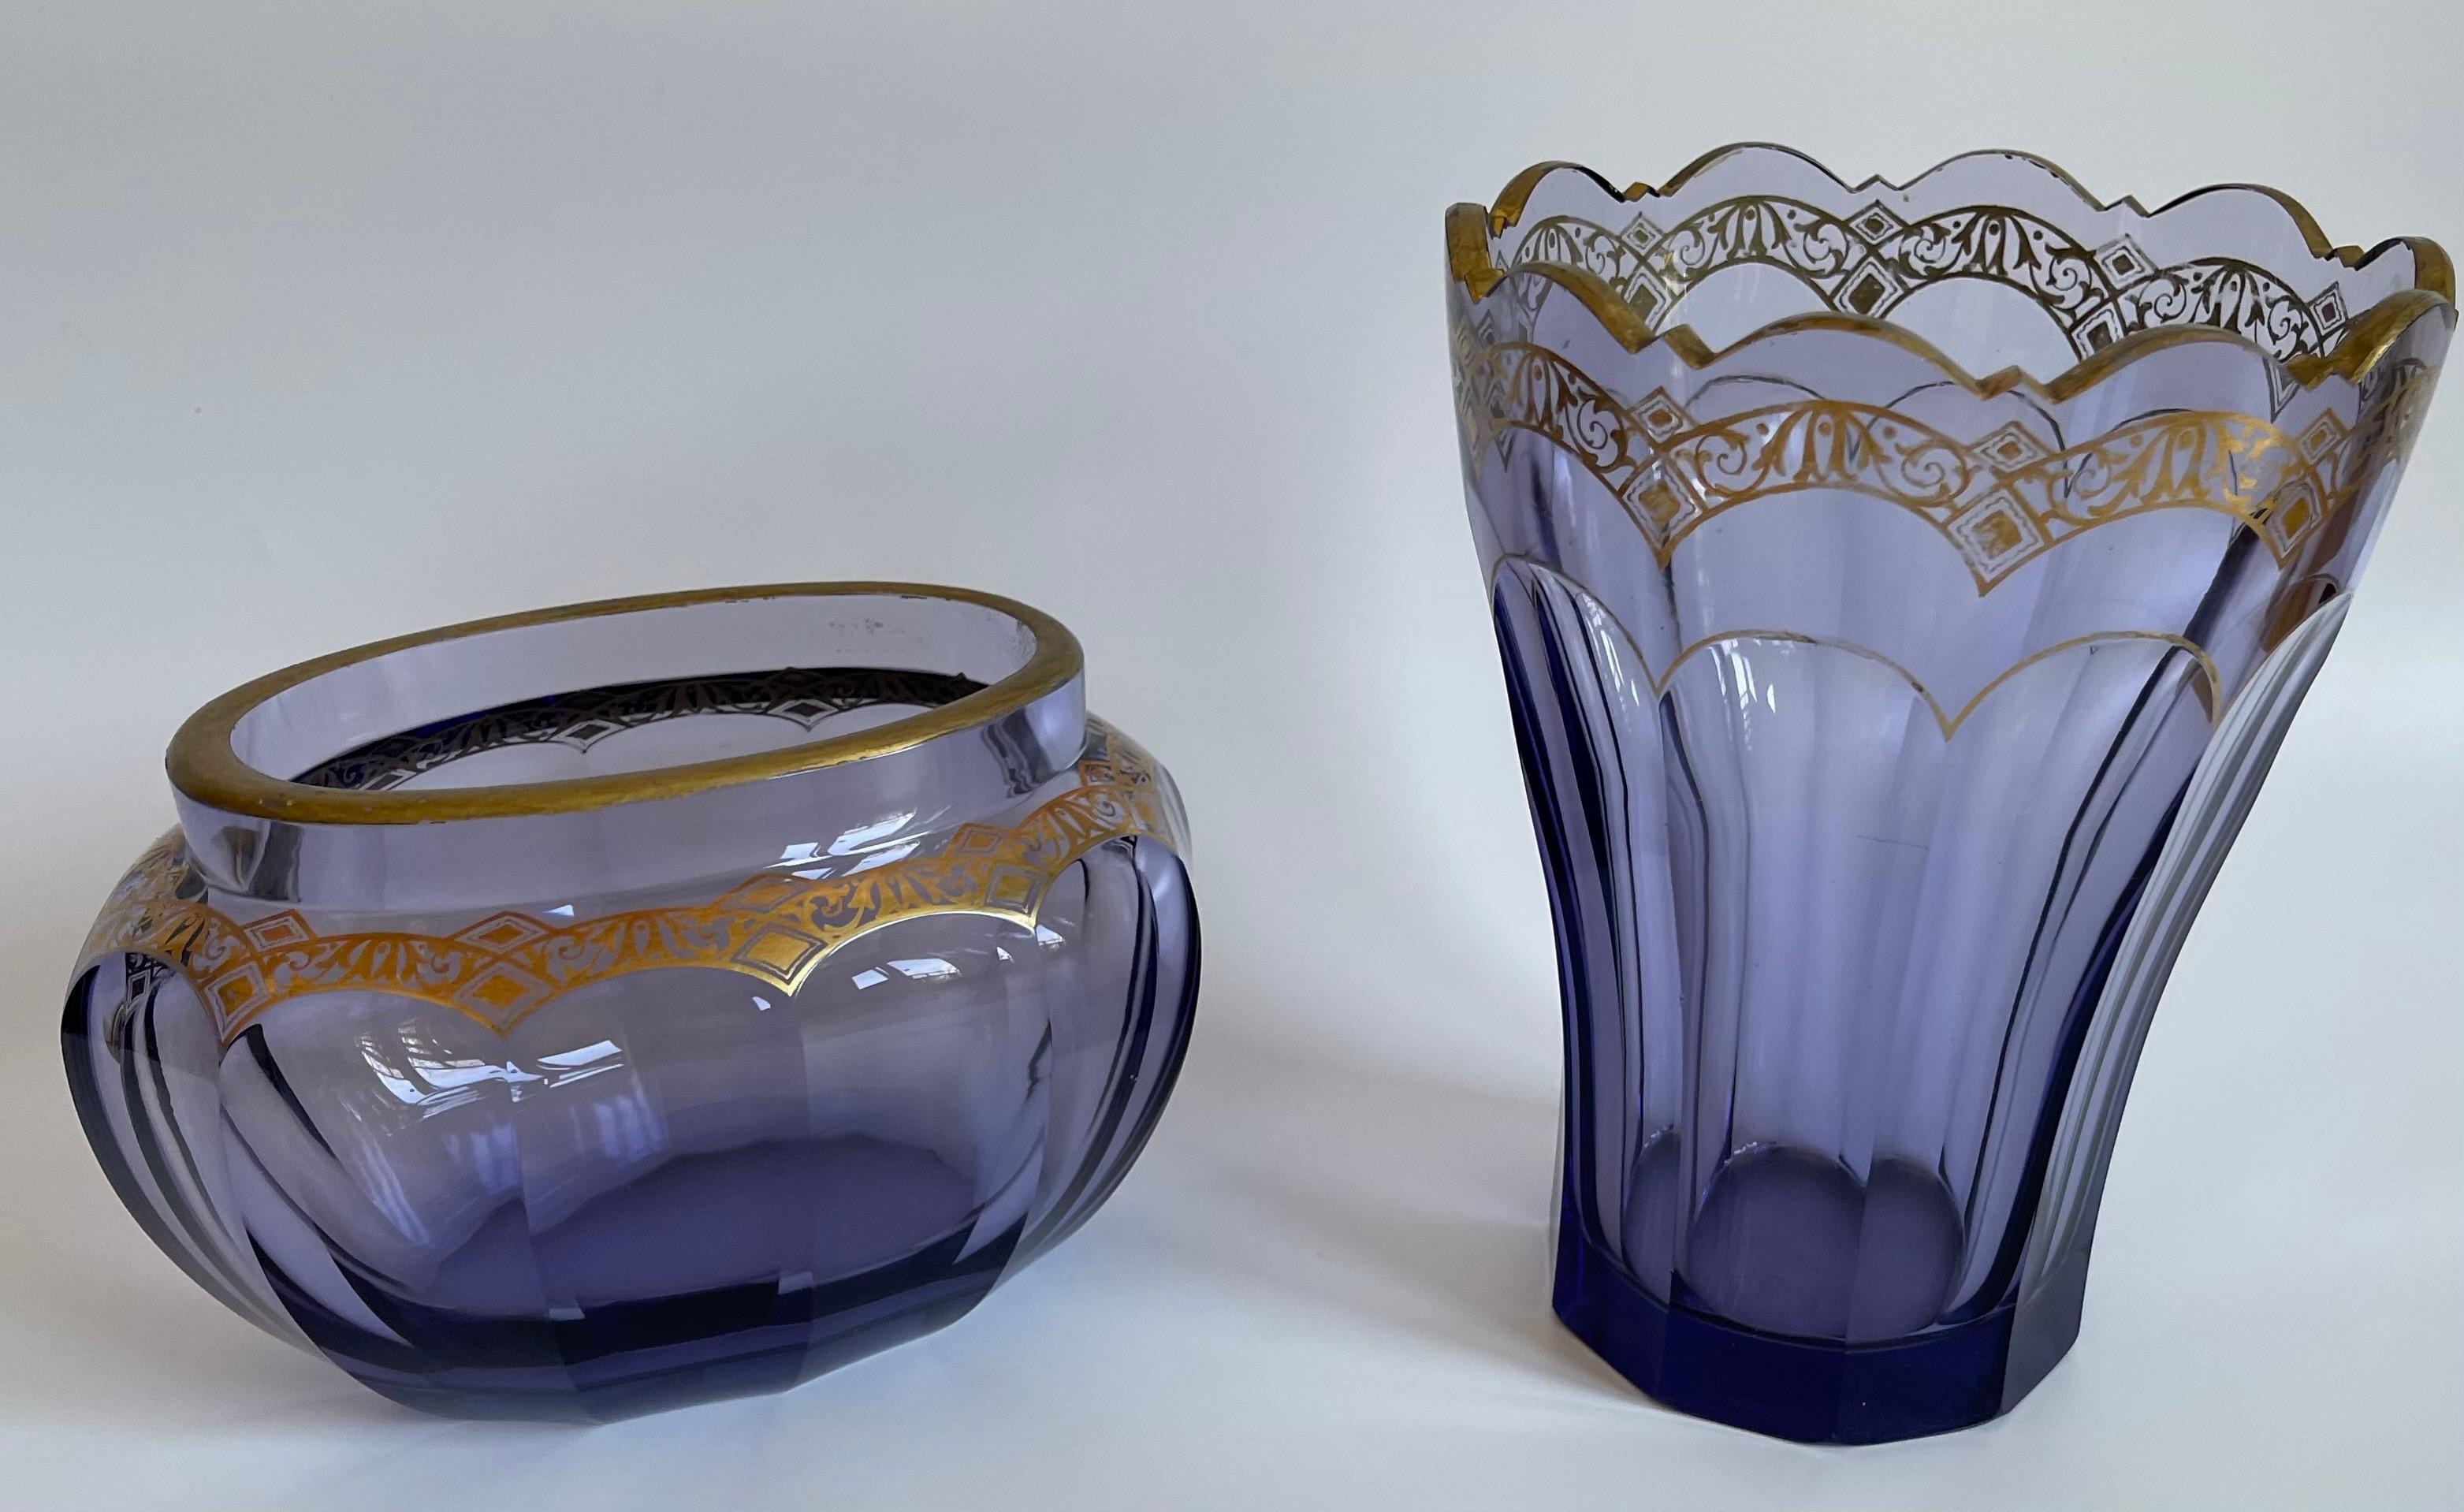 Typical Art Deco style Vase and Bowl Set in purple-blue colored thick, crystal glass with gold hand painted trim. It is really a nice addition to any interior from Modern to traditional.